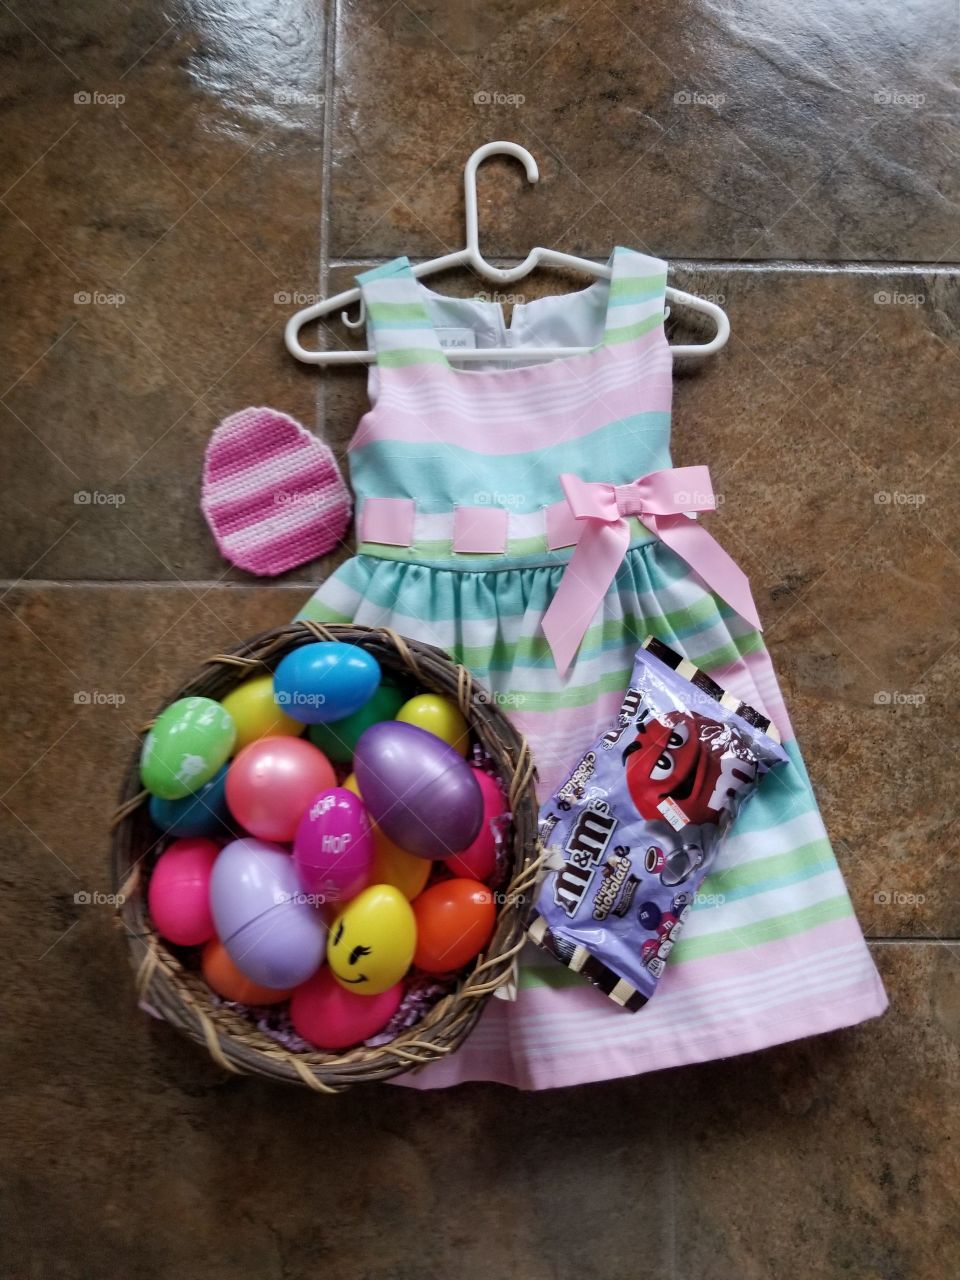 momma is ready for Easter! got the candy and eggs to hide. excited for little girl to wear her beautiful dress! happy Easter baby